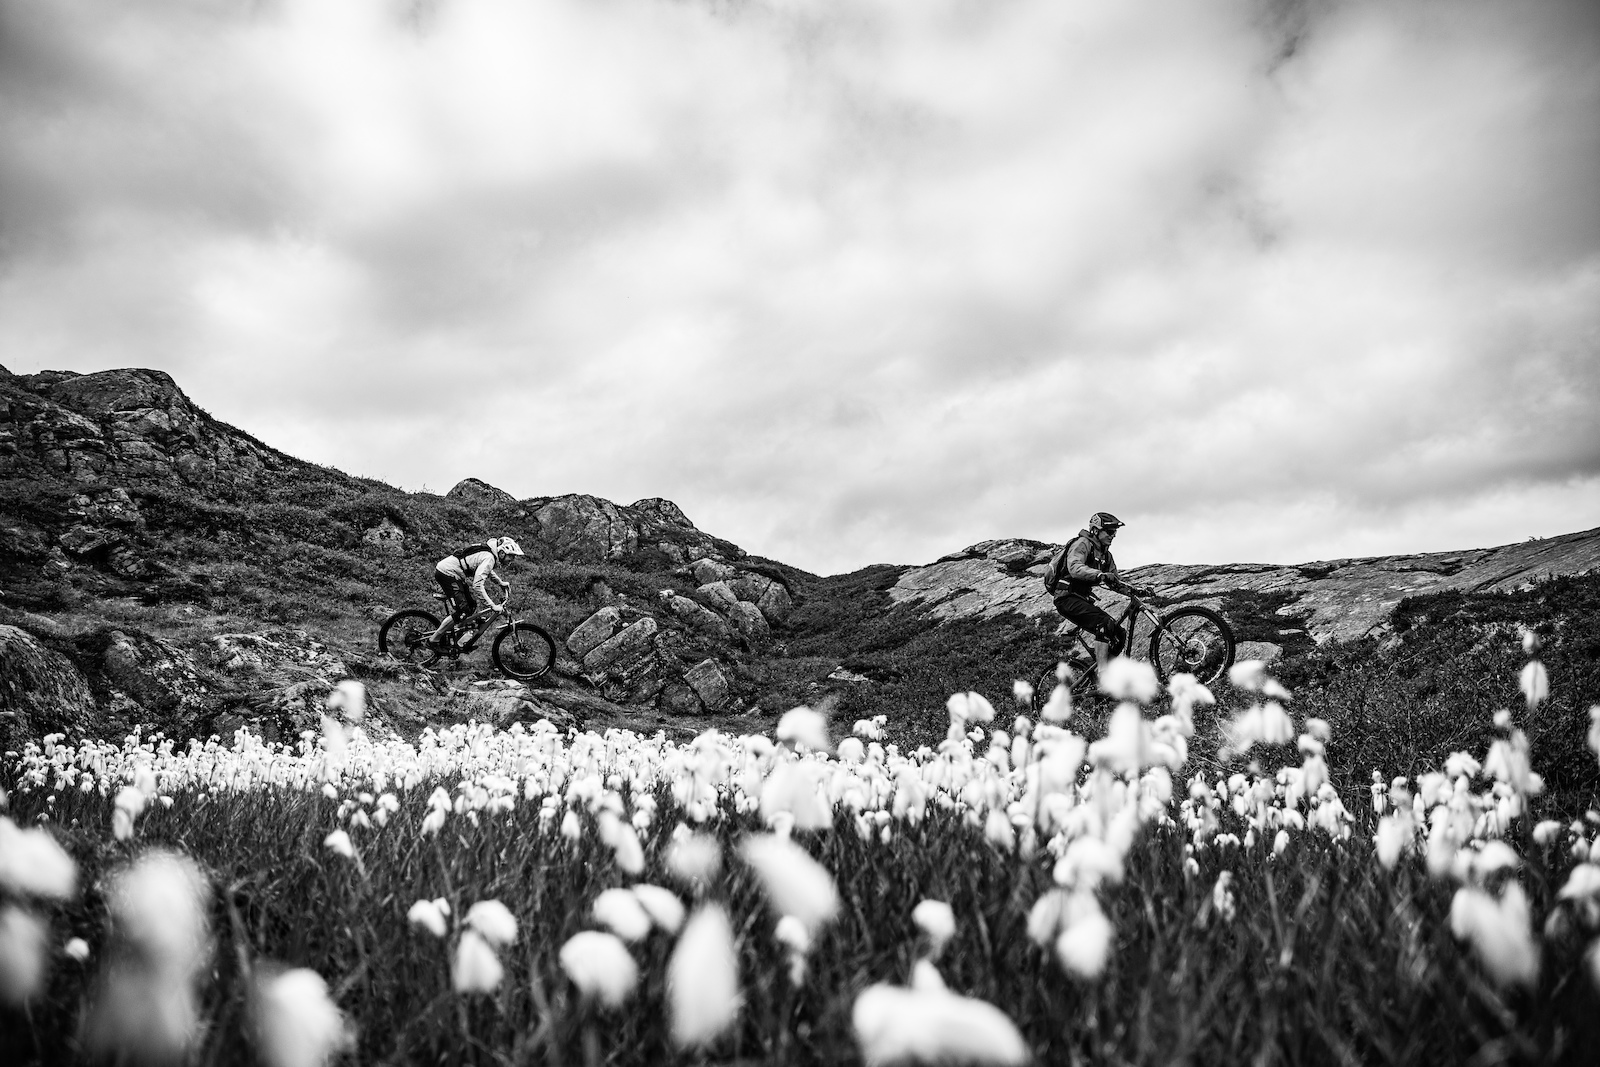 Andreas flows down the trail through the Alpine flowers of Norway, followed by one of the best Enduro riders in the world. Not a bad reward for creating a 1 minute video eh?